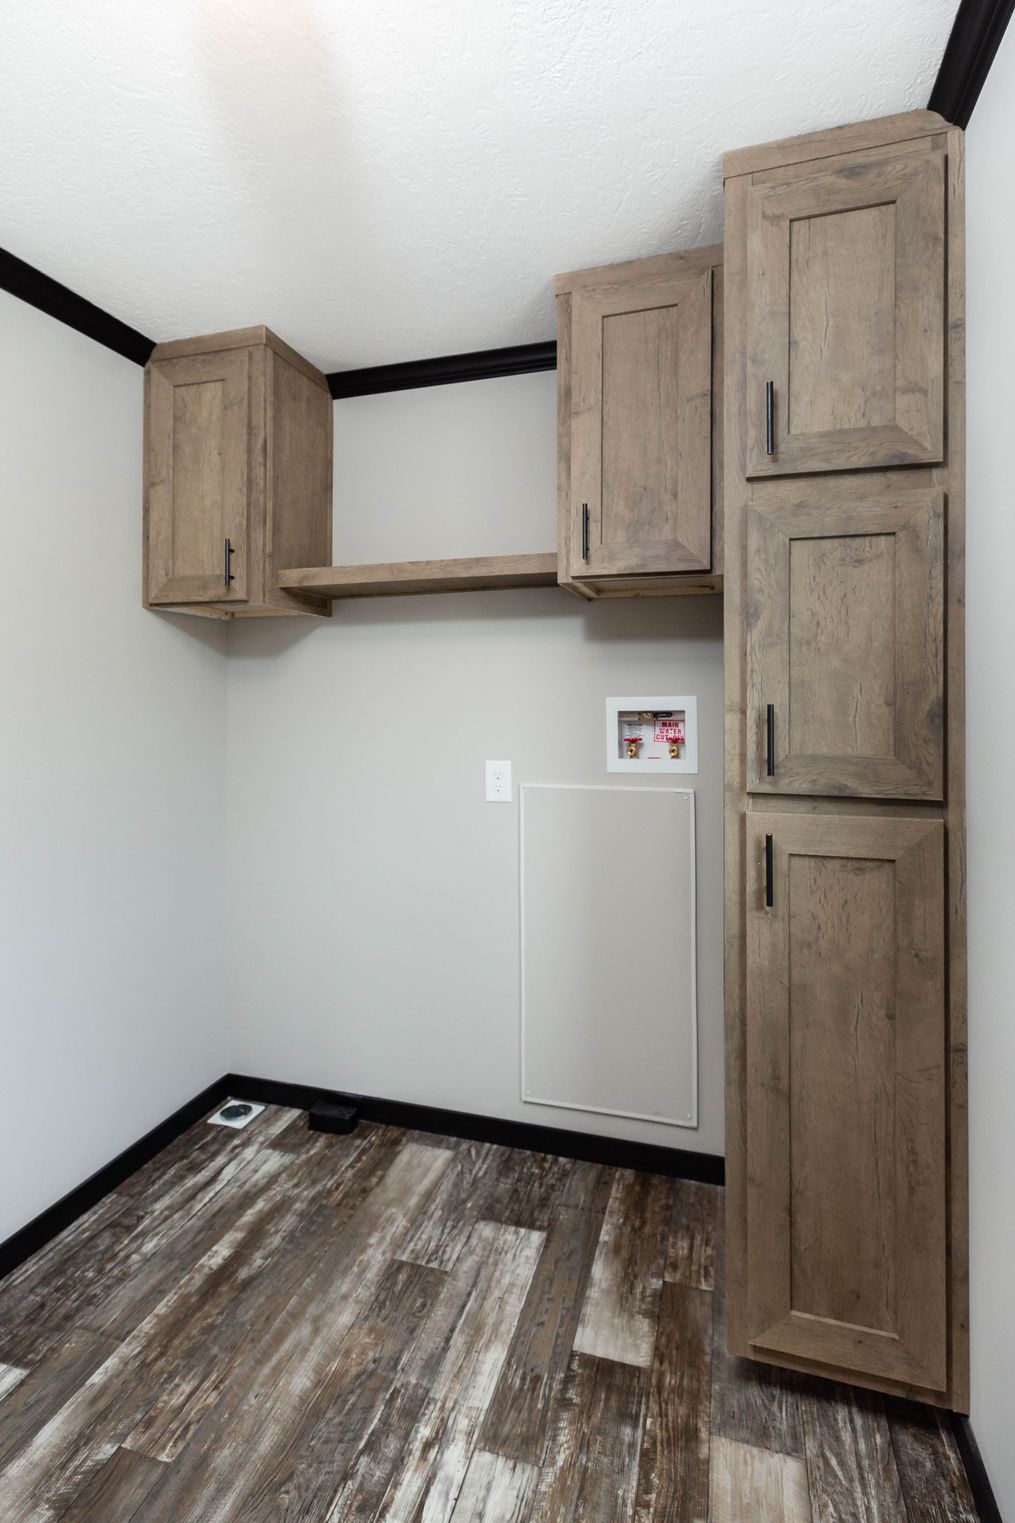 The BOUJEE XL Utility Room. This Manufactured Mobile Home features 4 bedrooms and 3 baths.